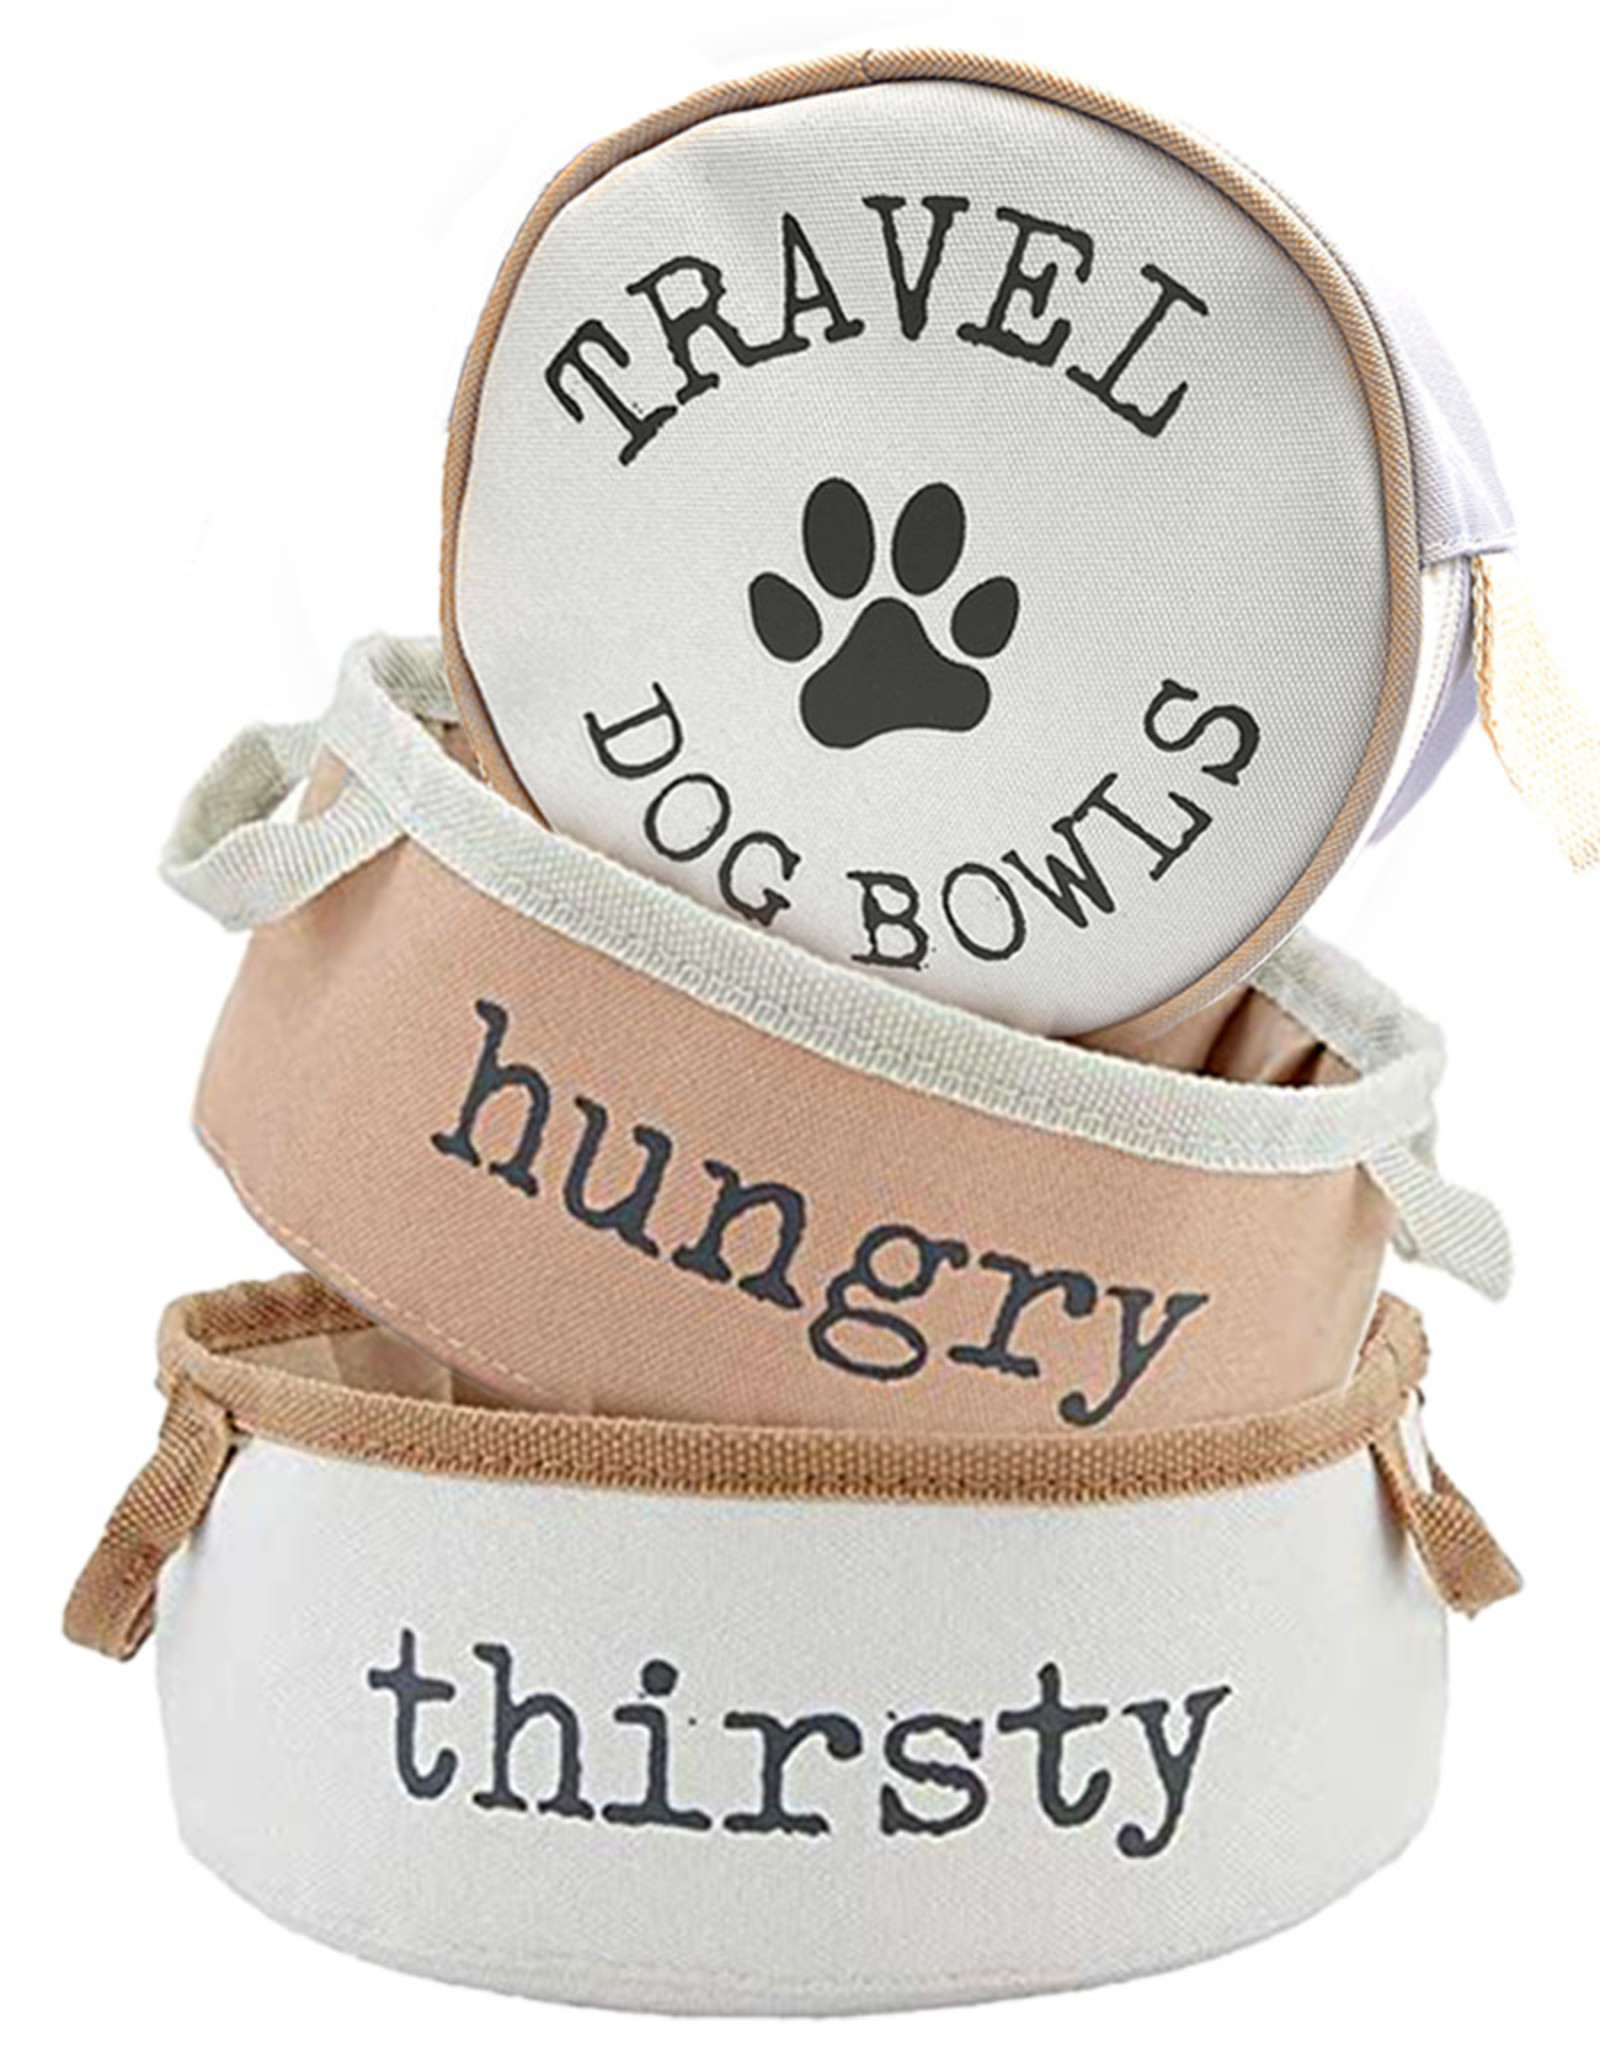 Mud Pie Travel Pet Bowls Set With Carring Case